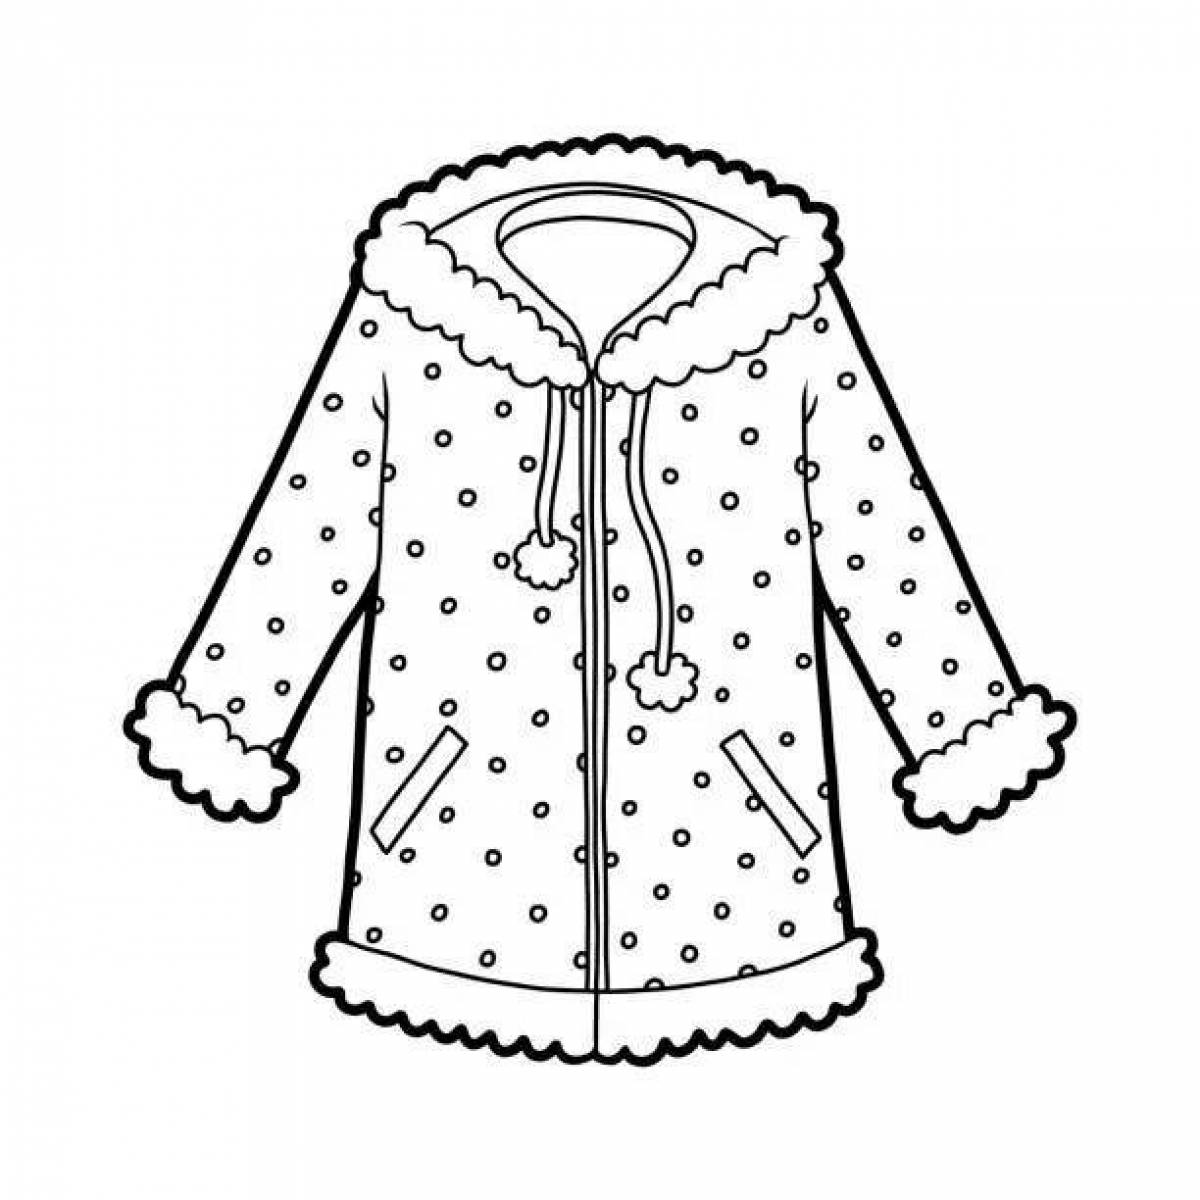 Playful coat coloring page for kids